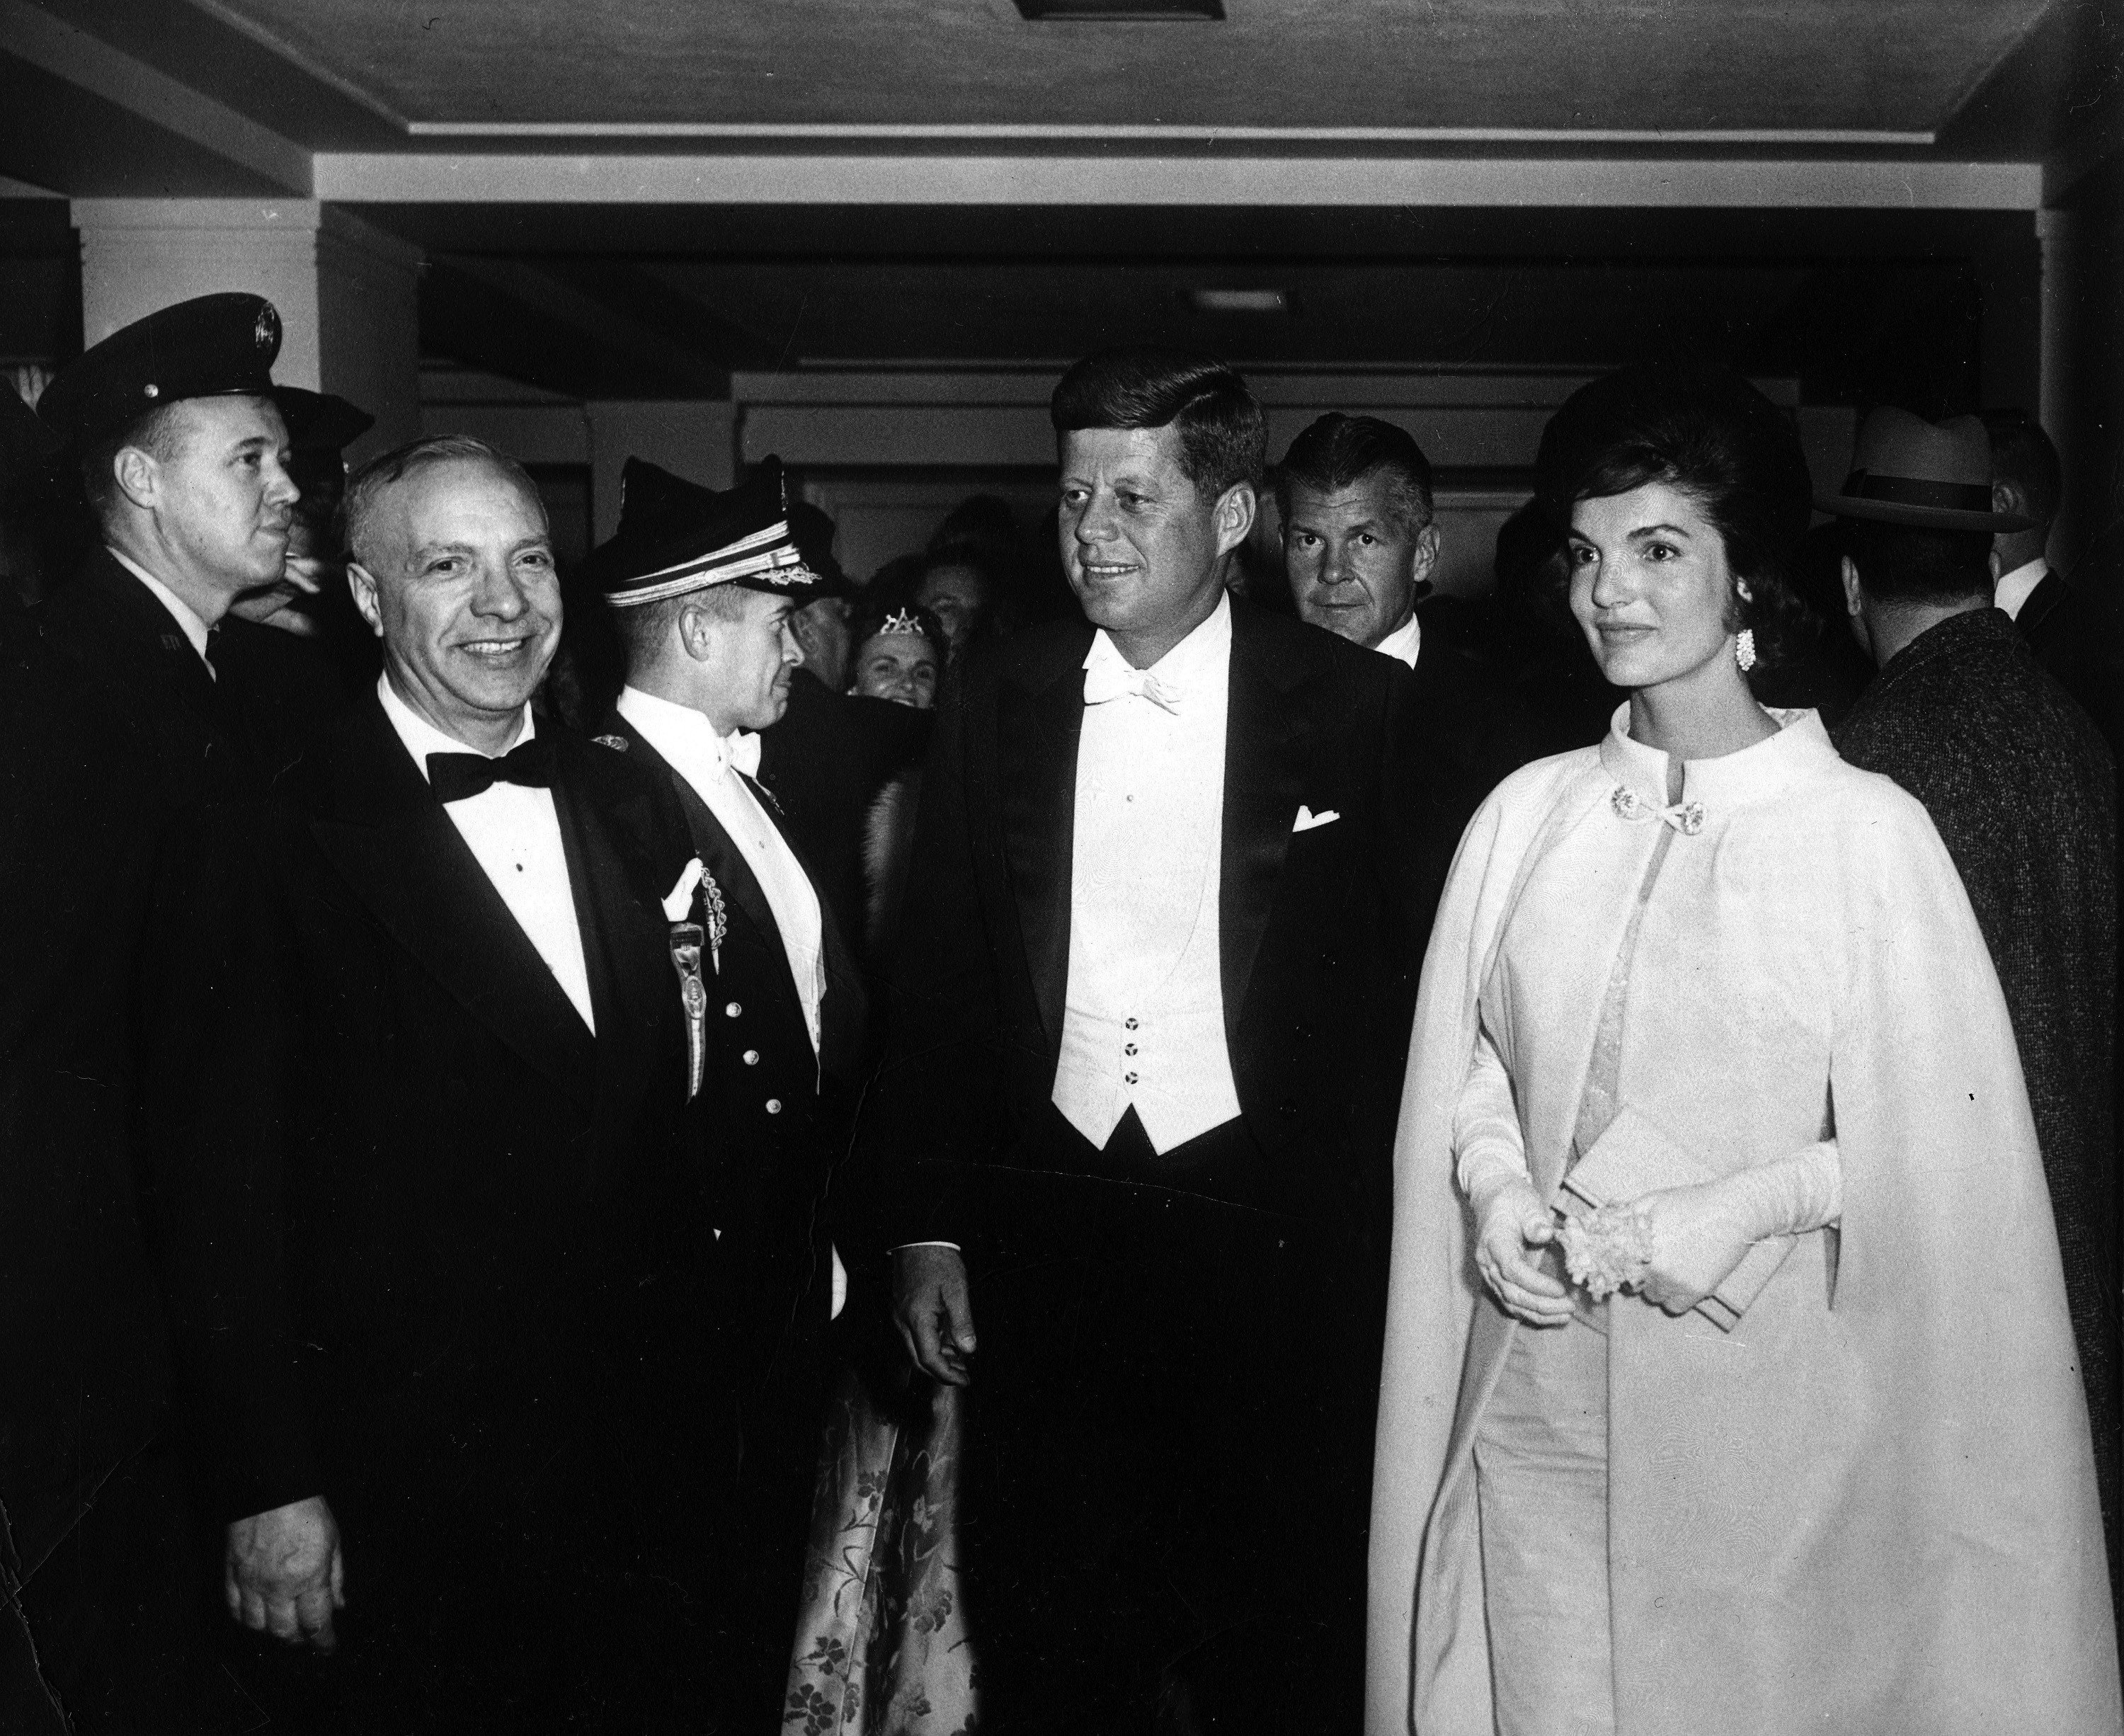 http://americanhistory.si.edu/first-ladies/jacqueline-kennedy